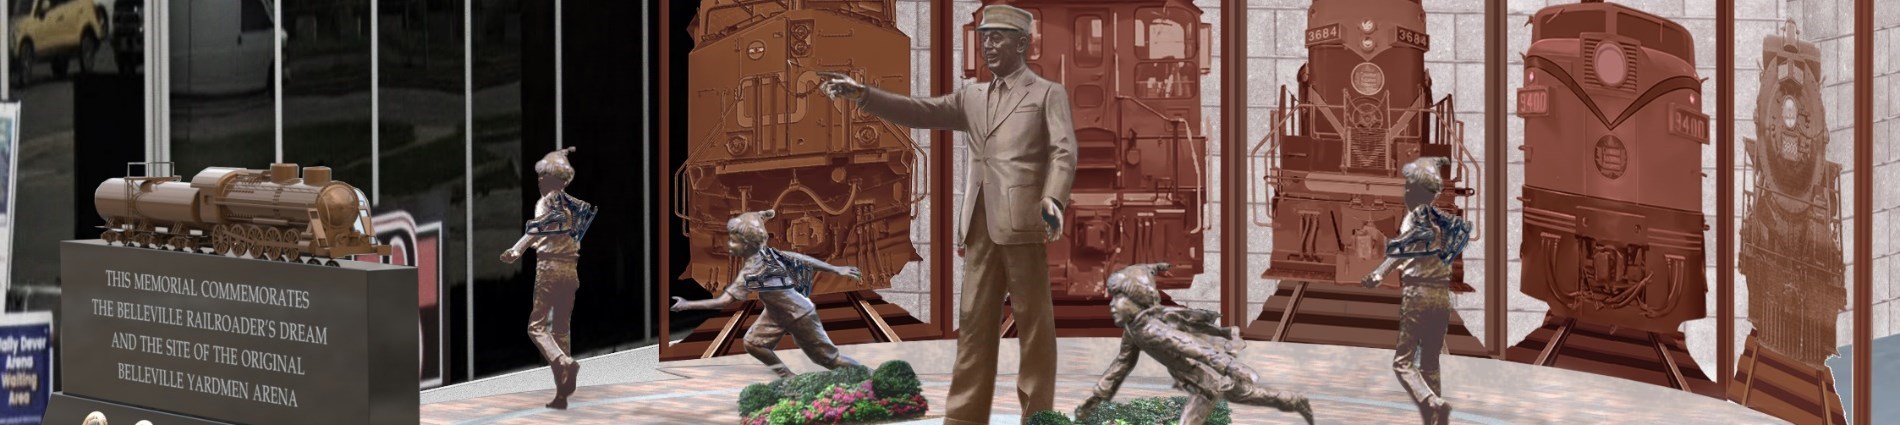 rendering of monument showing trains and railroaders